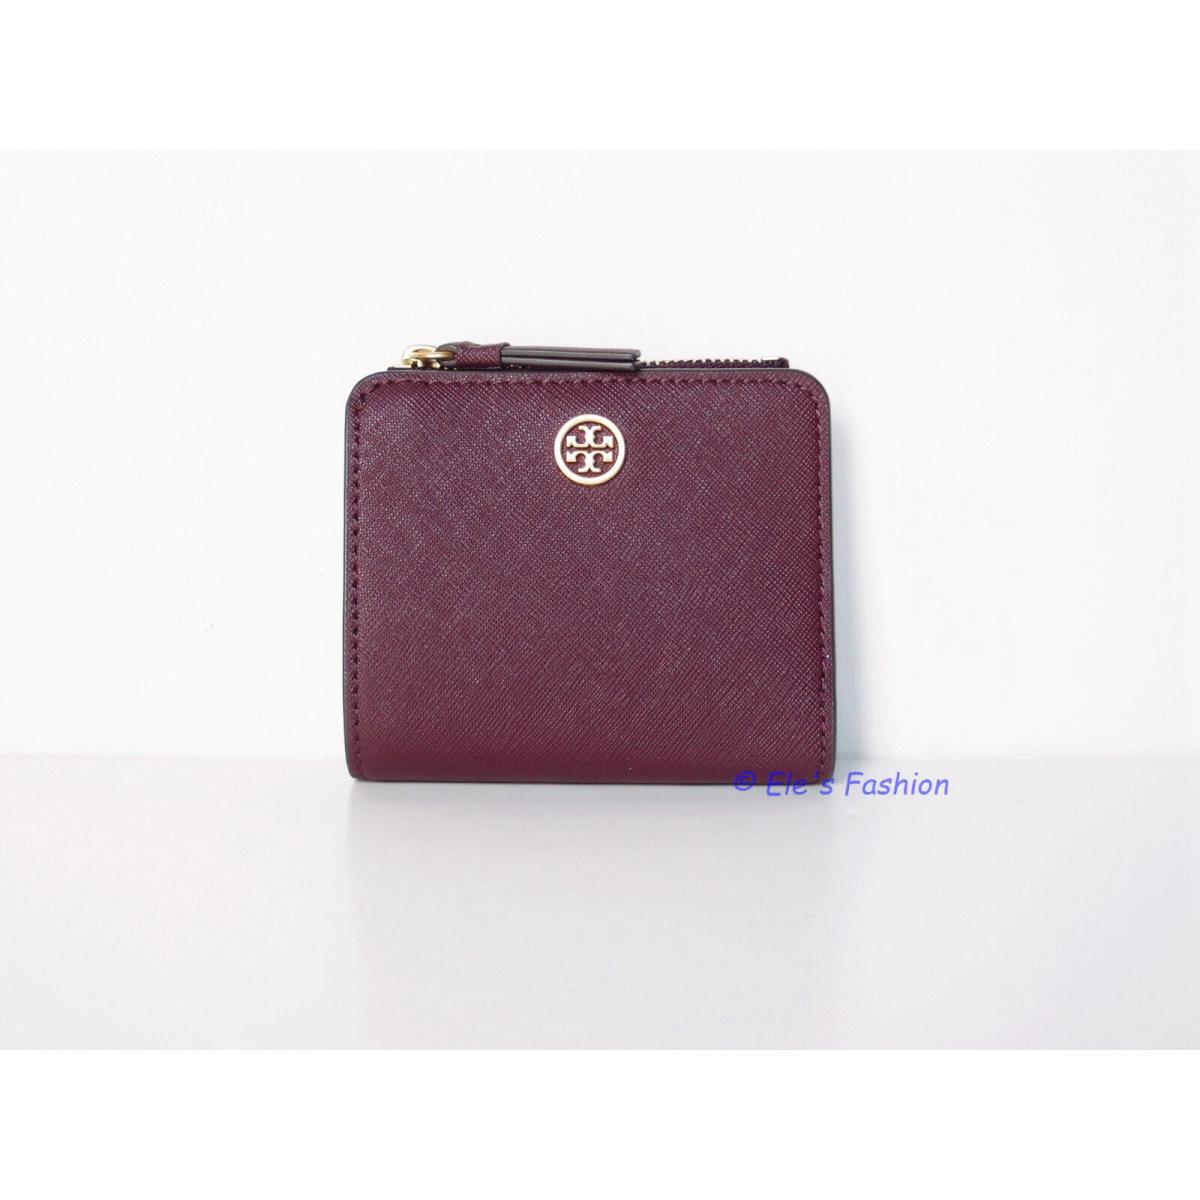 Tory Burch French wallet 